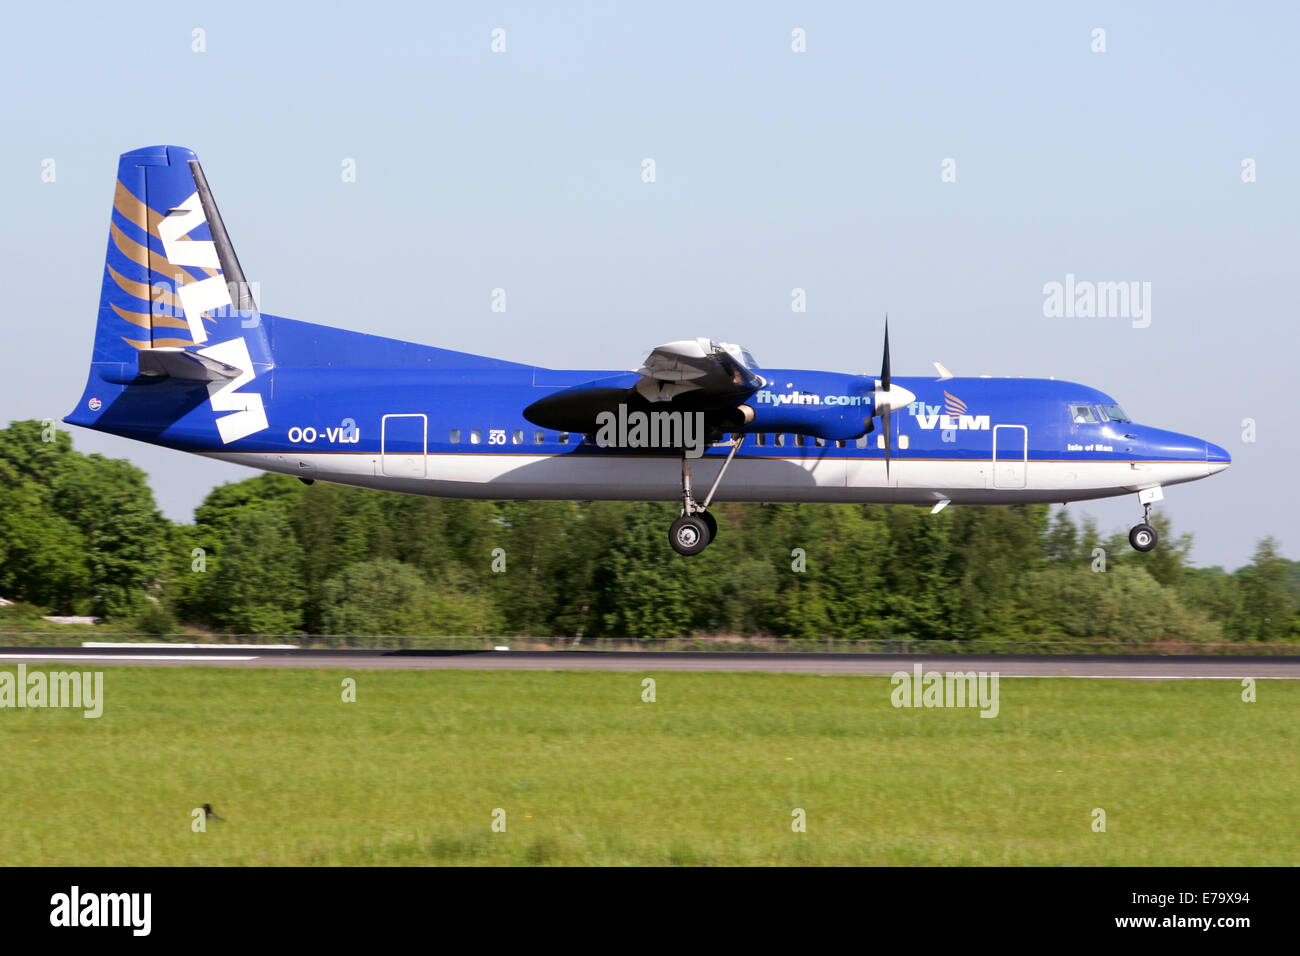 VLM Fokker 50 approaches runway 05R at Manchester airport. Stock Photo